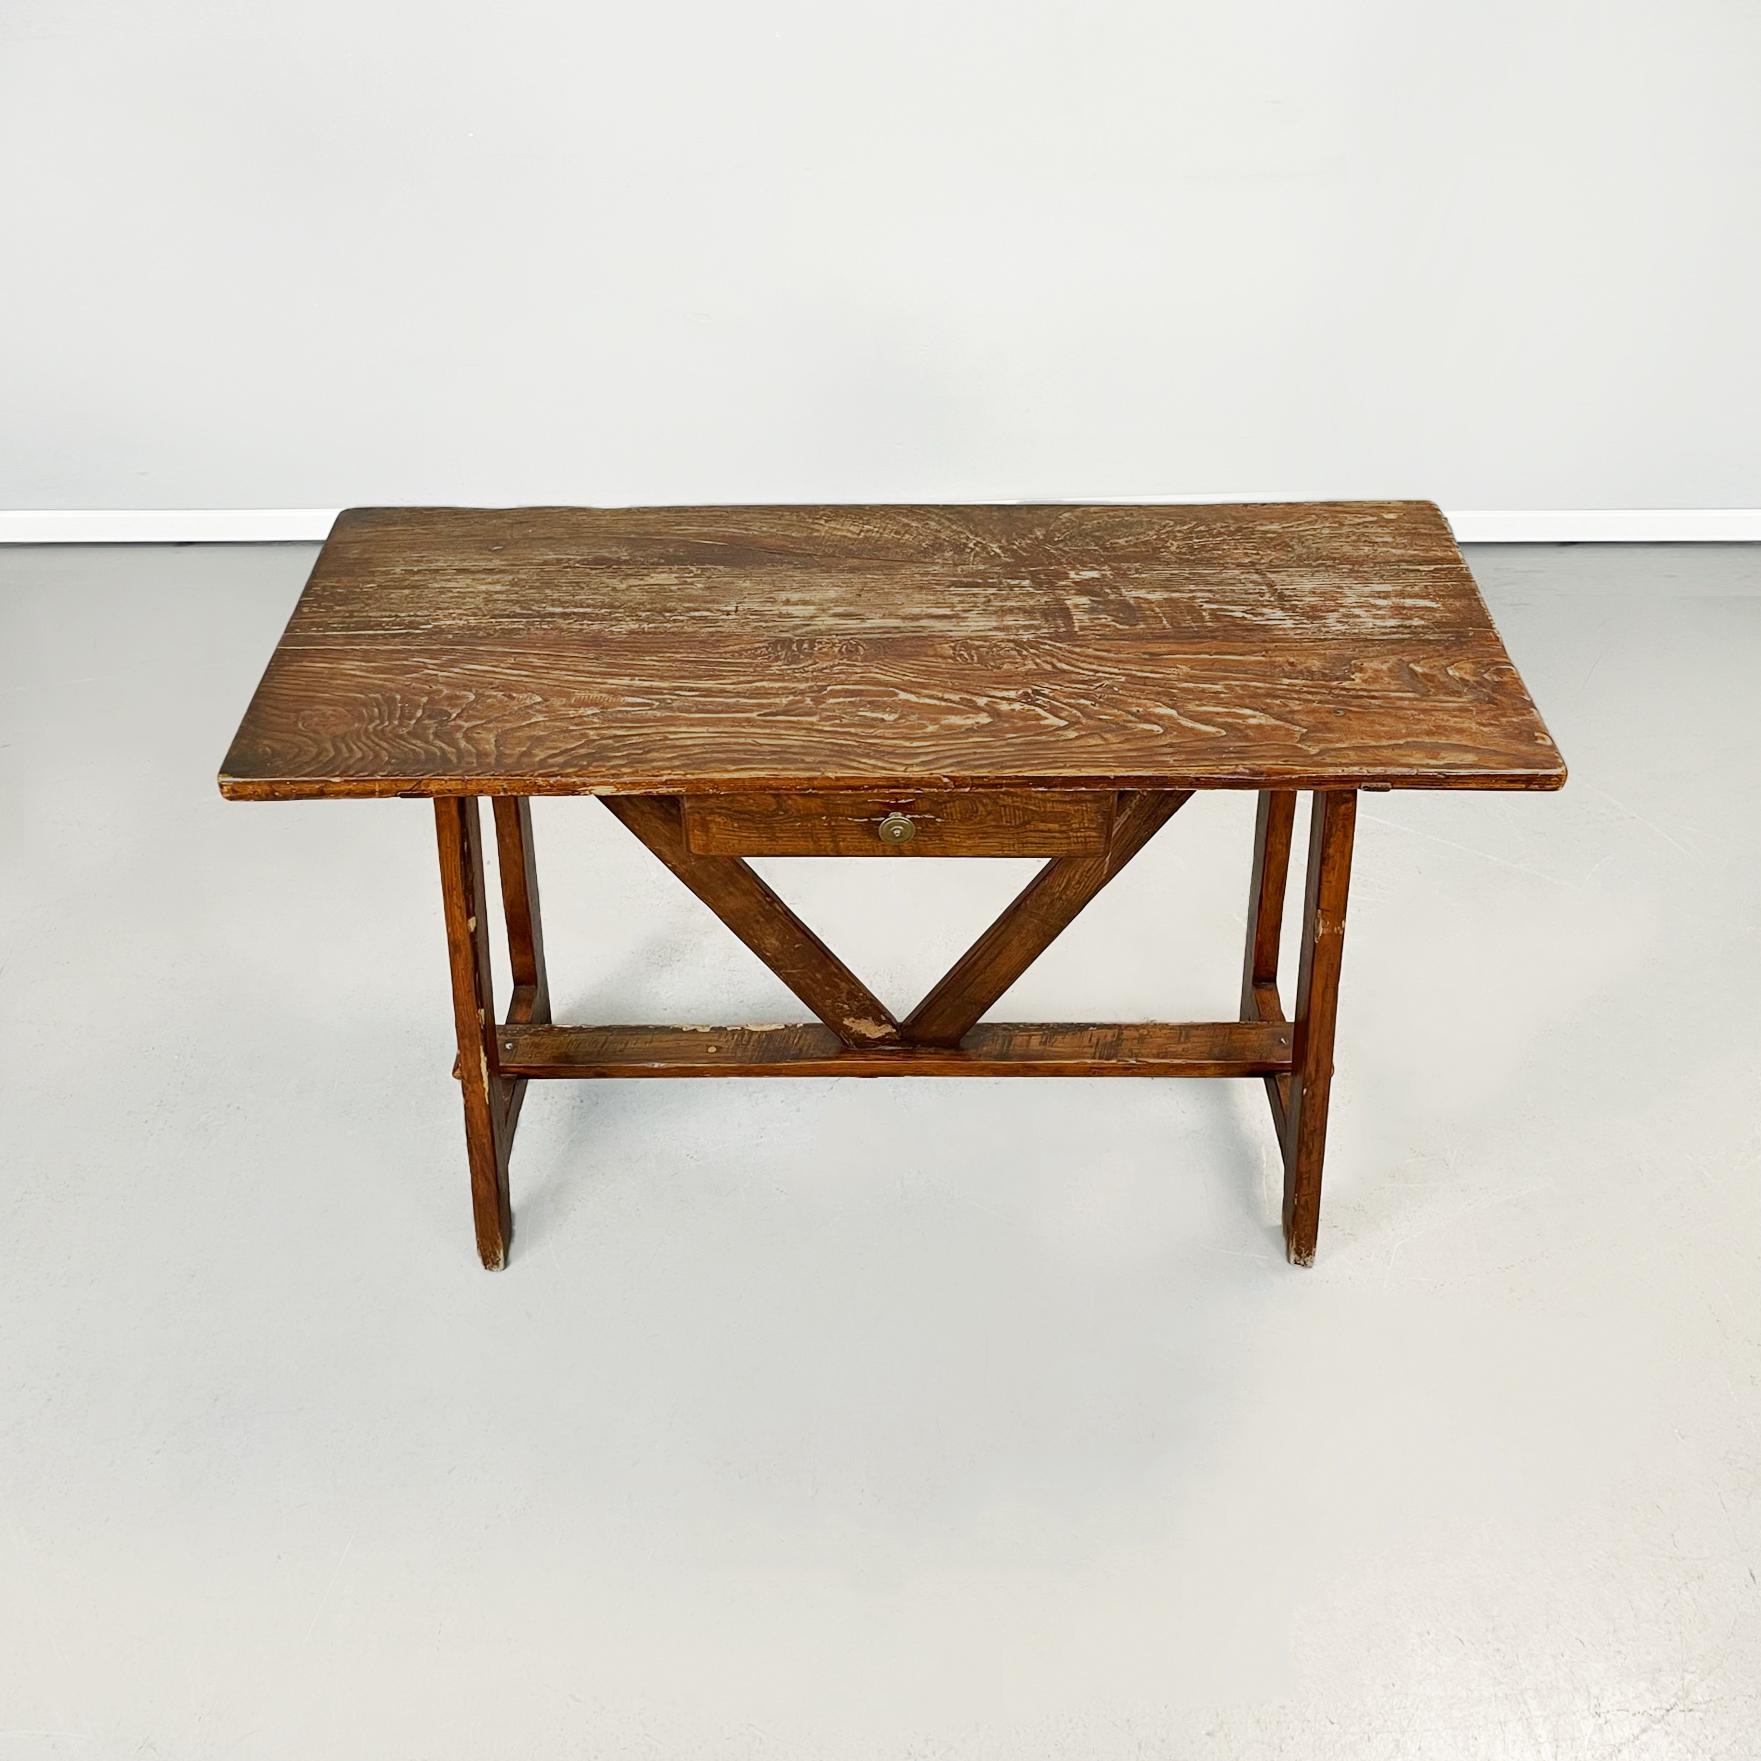 Italian Antique Wooden Table Fratino with a Drawer, 1900s For Sale 1